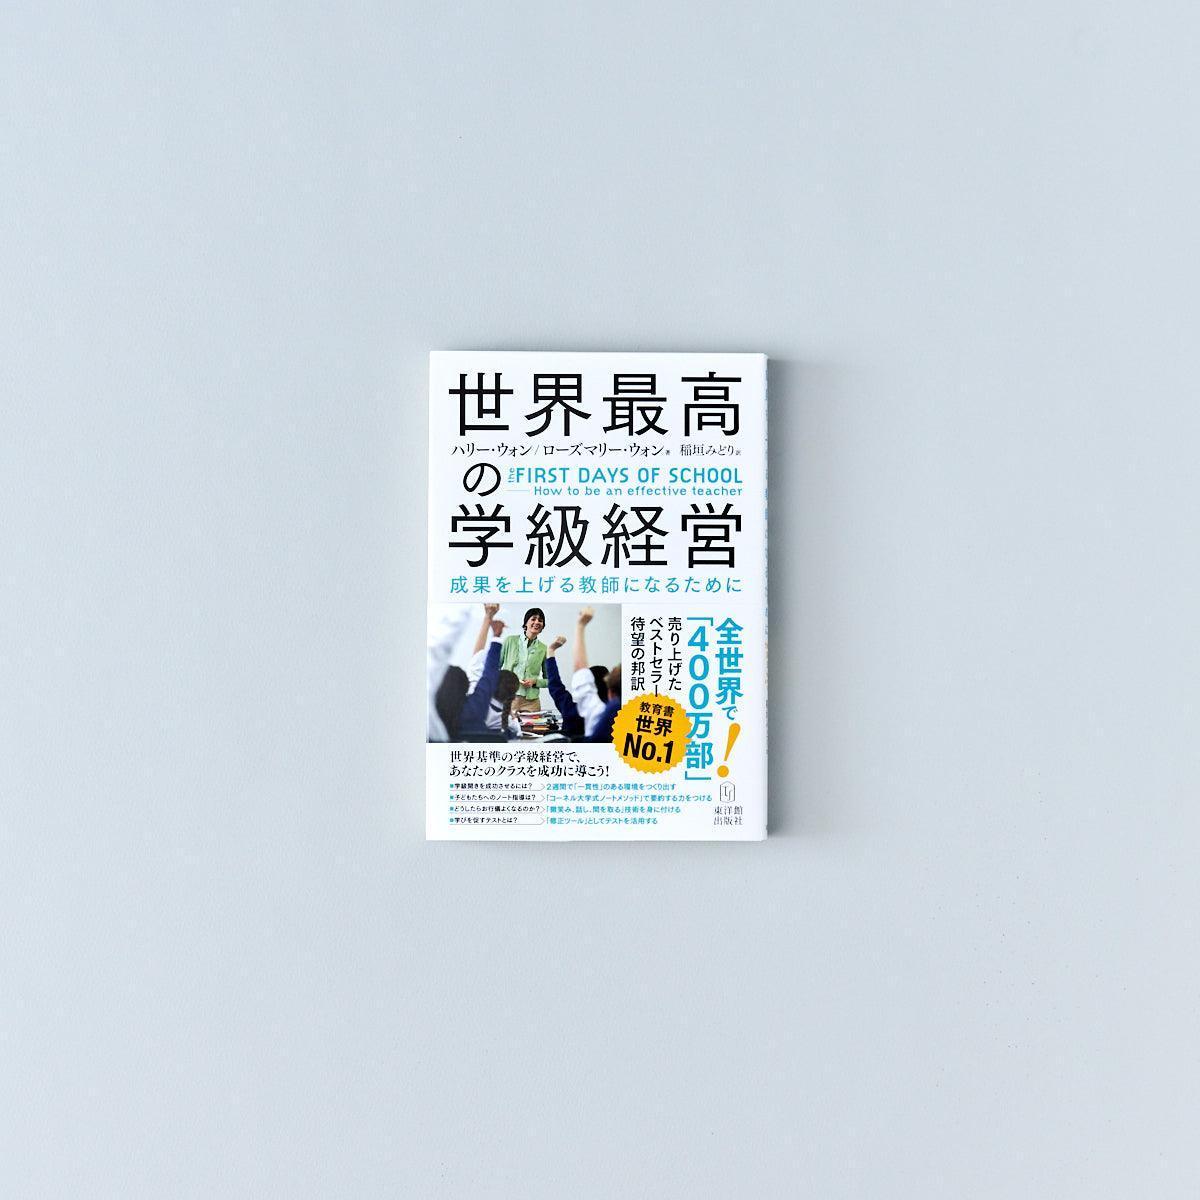 –　effective　be　SCHOOL　世界最高の学級経営　to　—How　teacher　DAYS　the　FIRST　東洋館出版社　OF　an